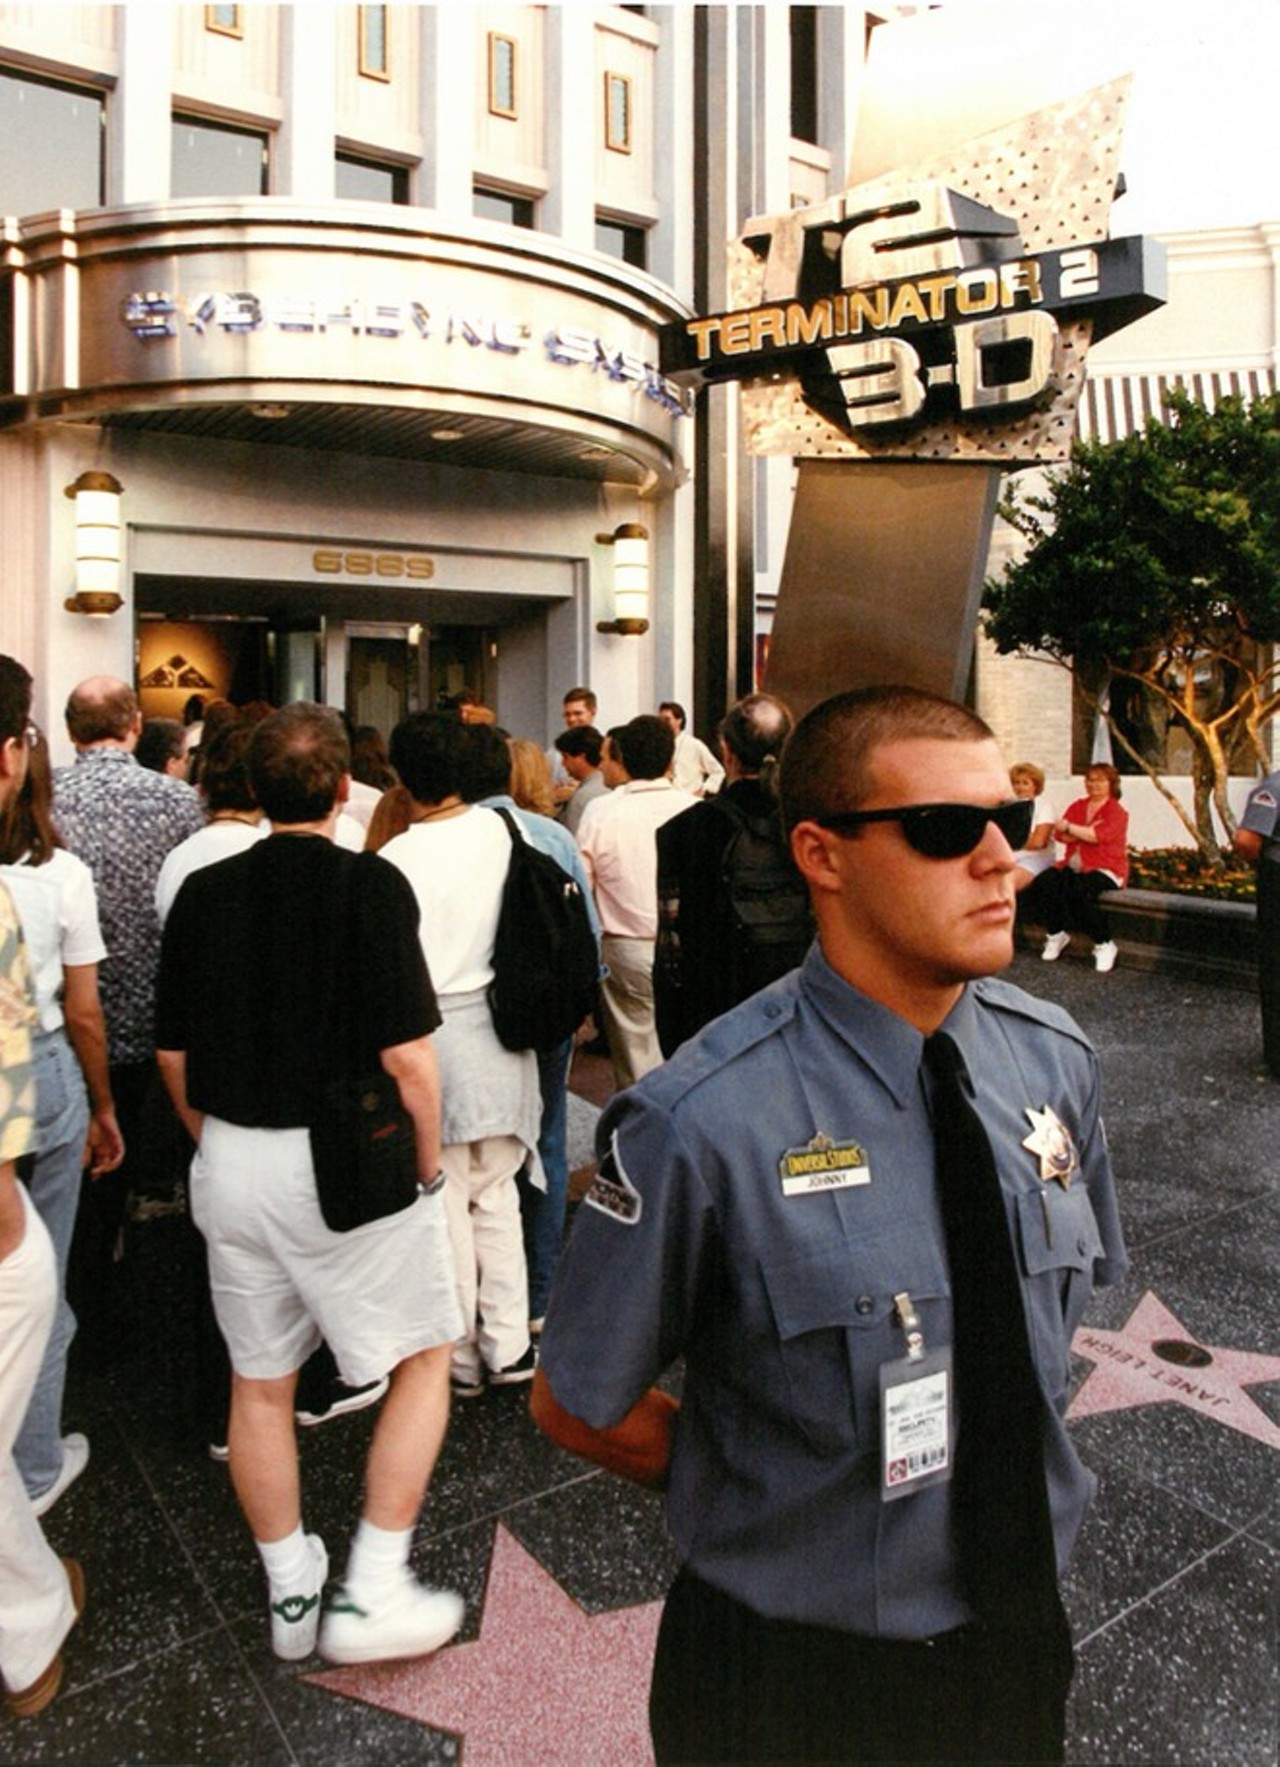 30 photos proving the best decade at Universal Studios Orlando was the '90s